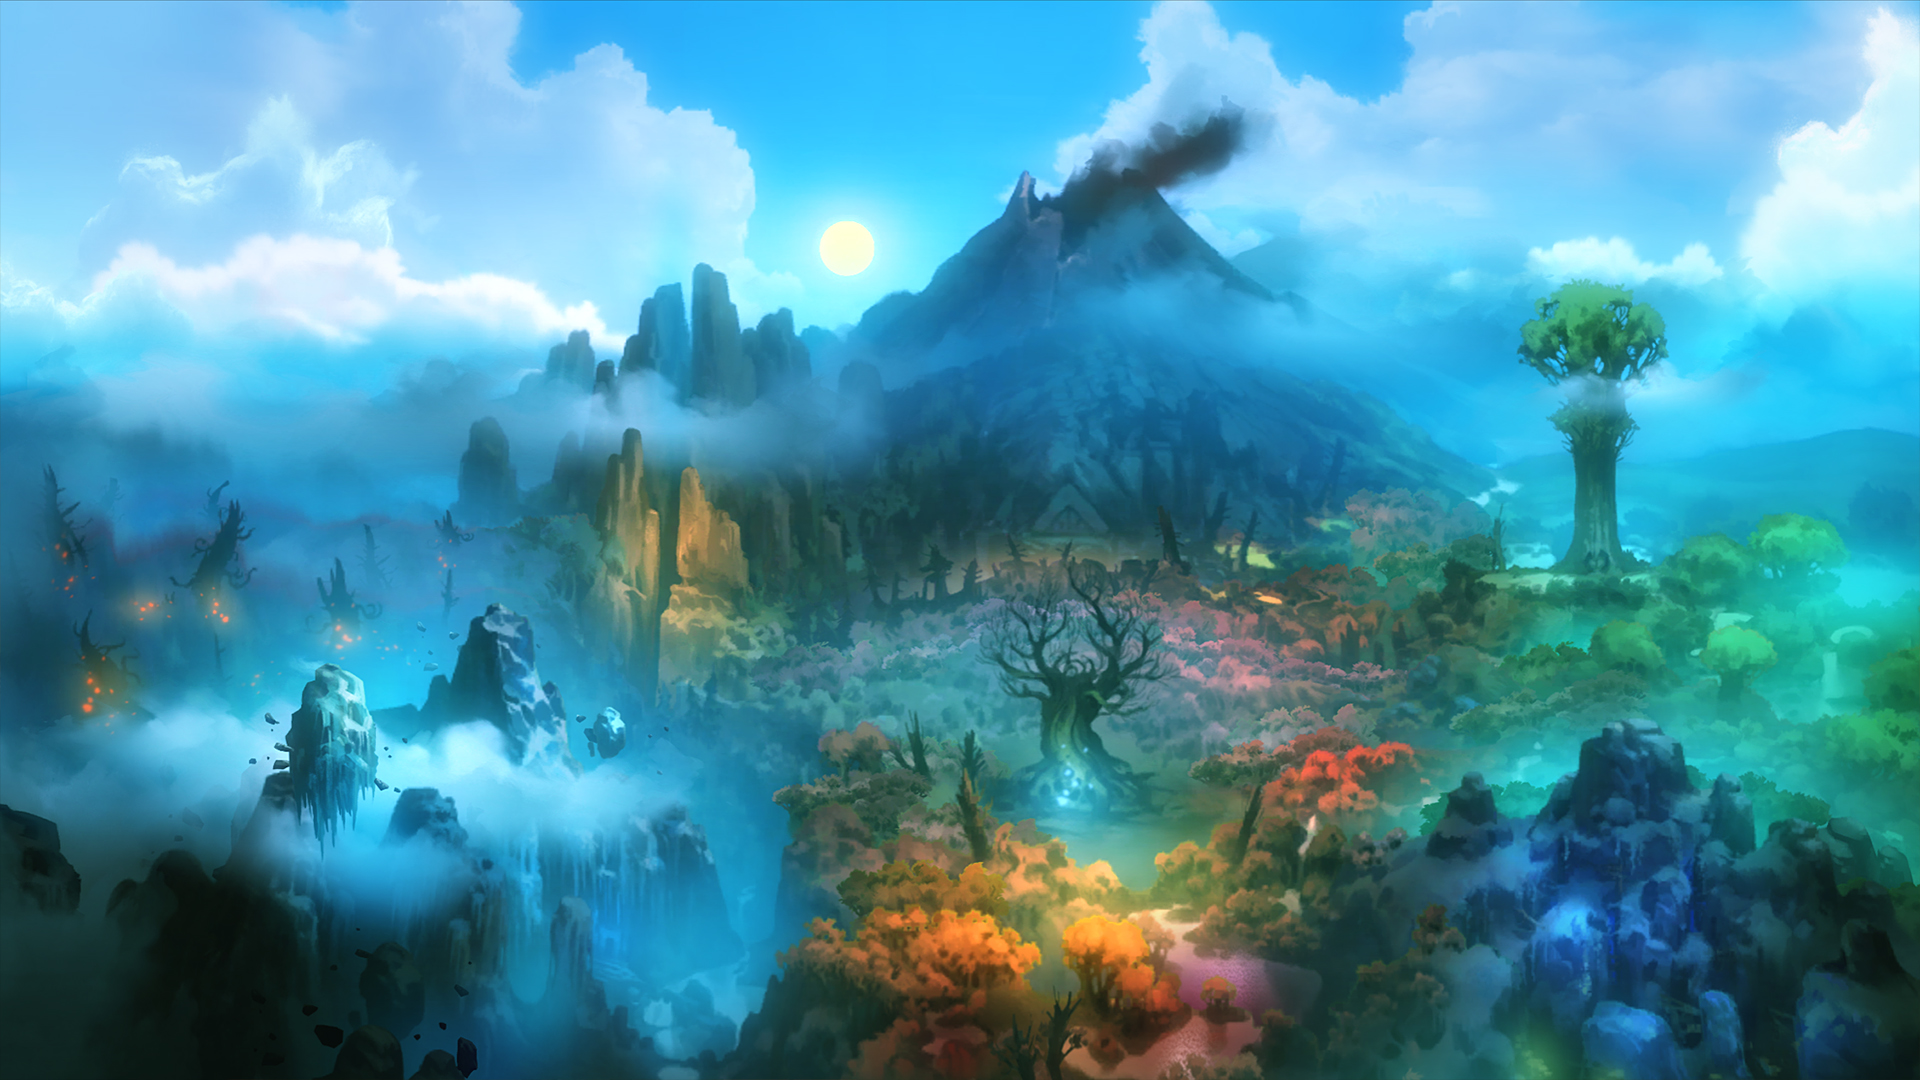 Wonderful Ori And The Blind Forest Wallpaper Full HD